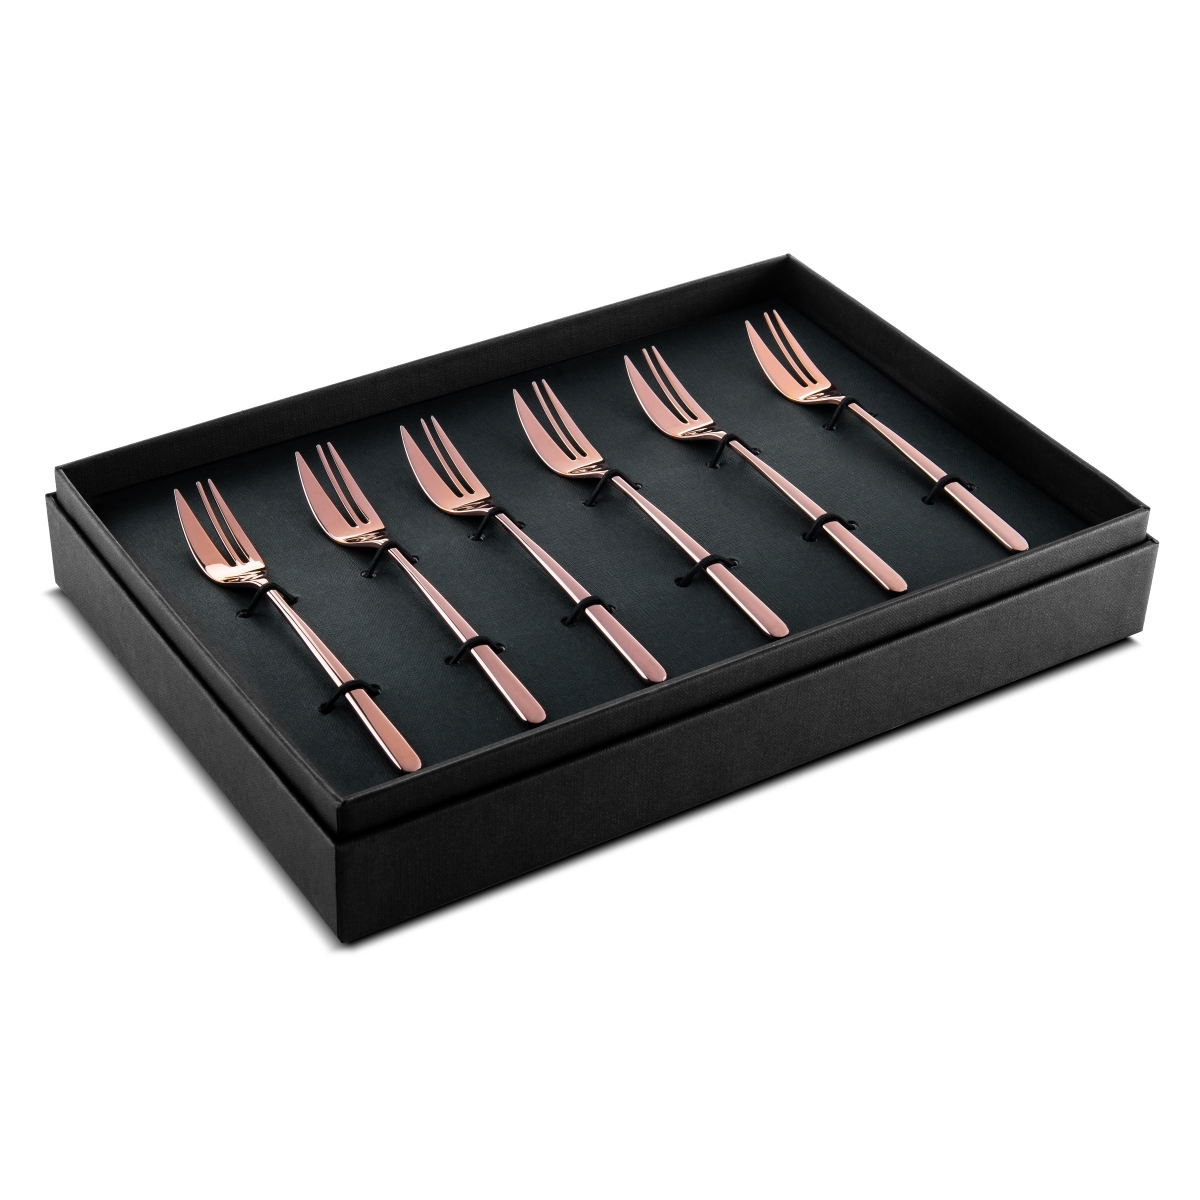 Picture of Mepra 109144115 Linea Bronzo Cake Fork - Set of 6